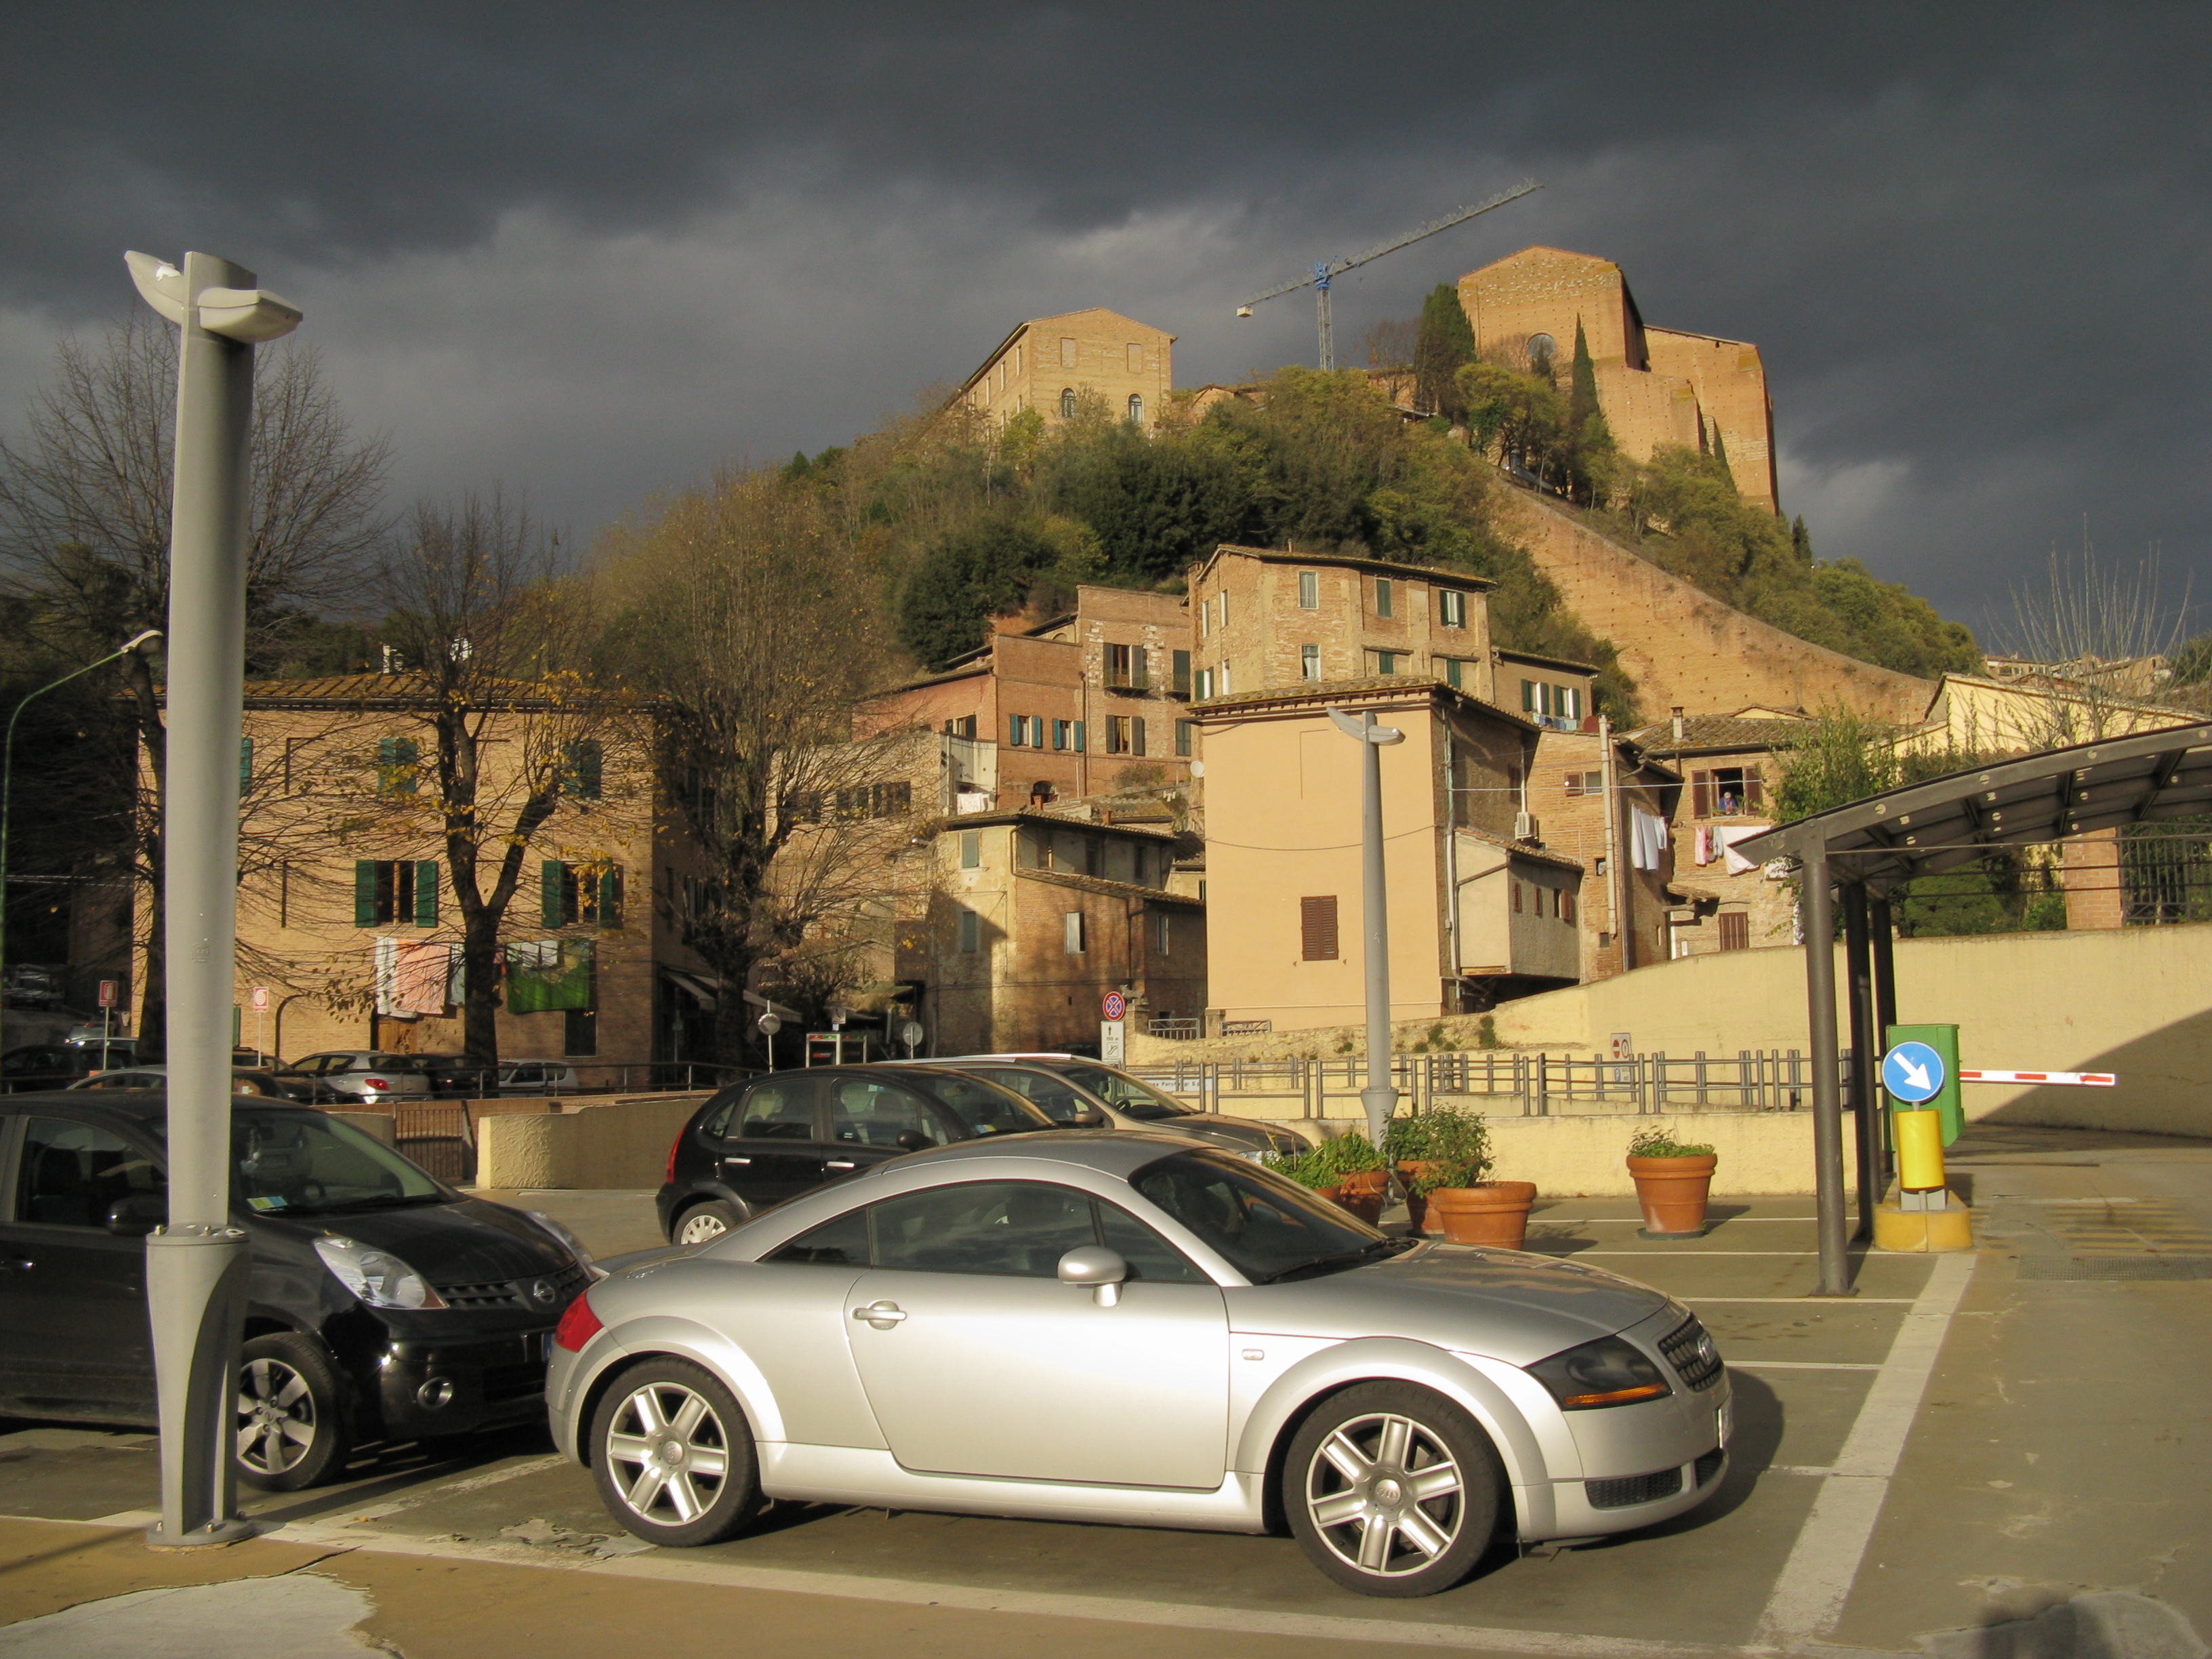 Siena Parking lot with sun and snow clouds